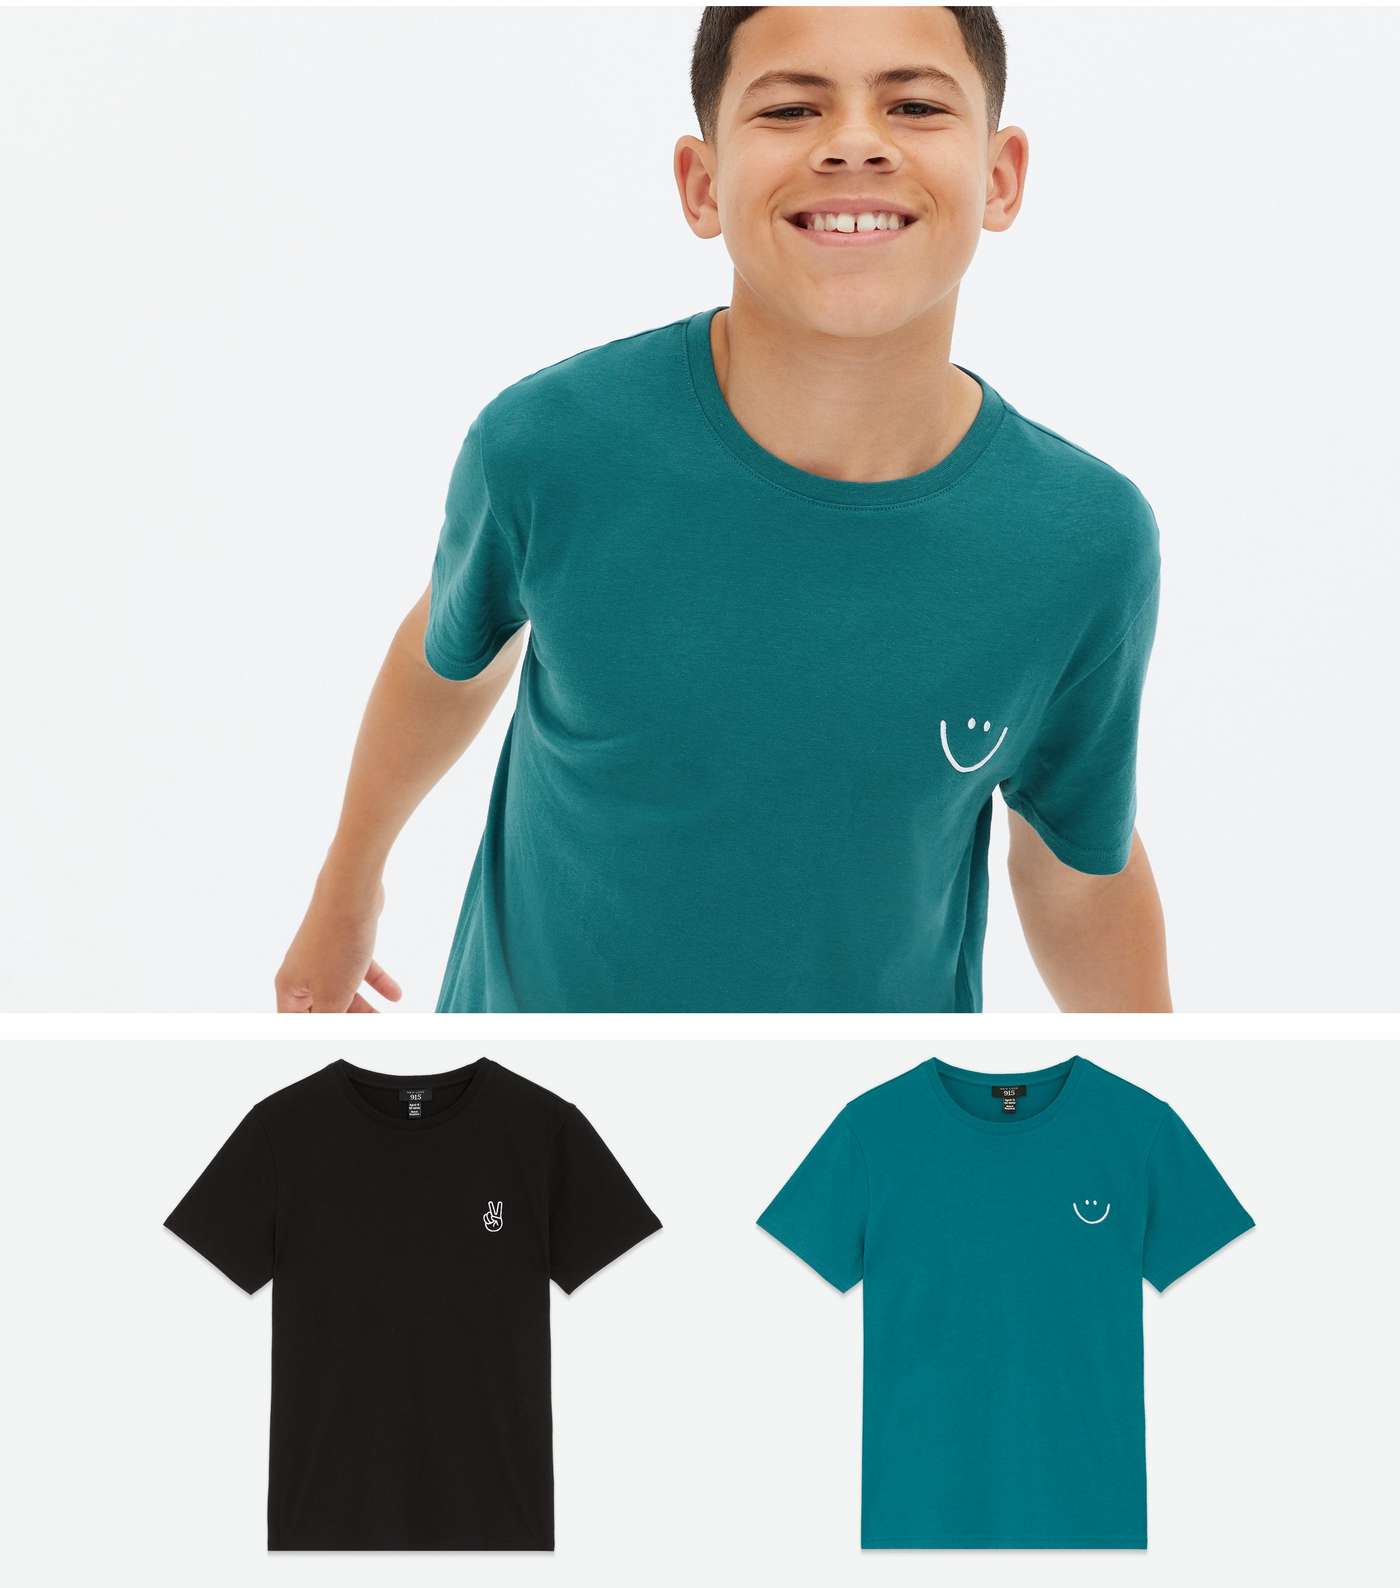 Boys 2 Pack Teal and Black Mixed Embroidered T-Shirts